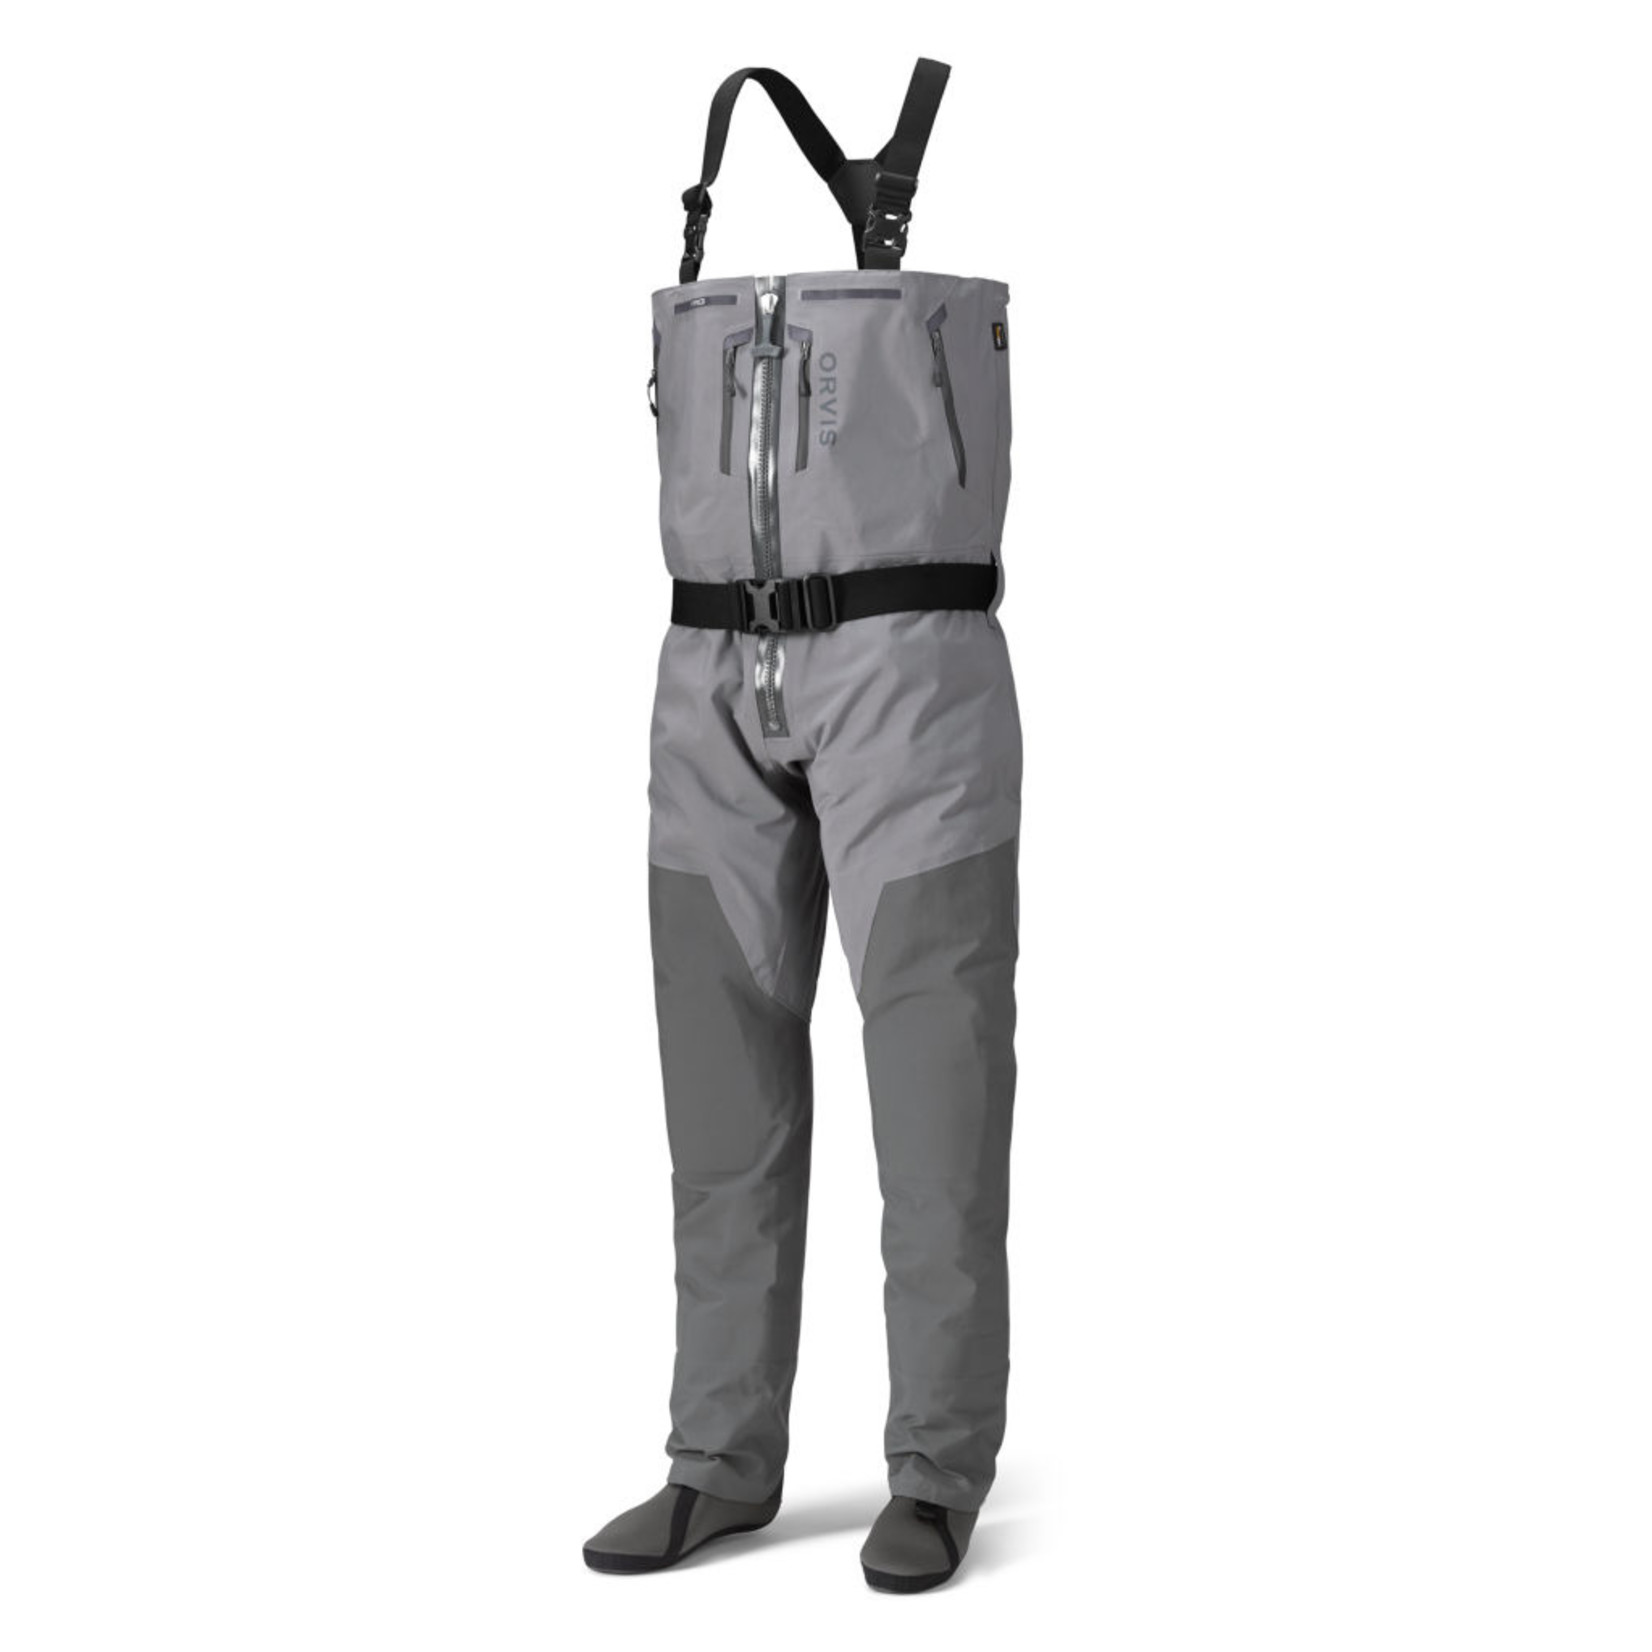 Men's Pro Zipper Stockingfoot Wader - Concord Outfitters